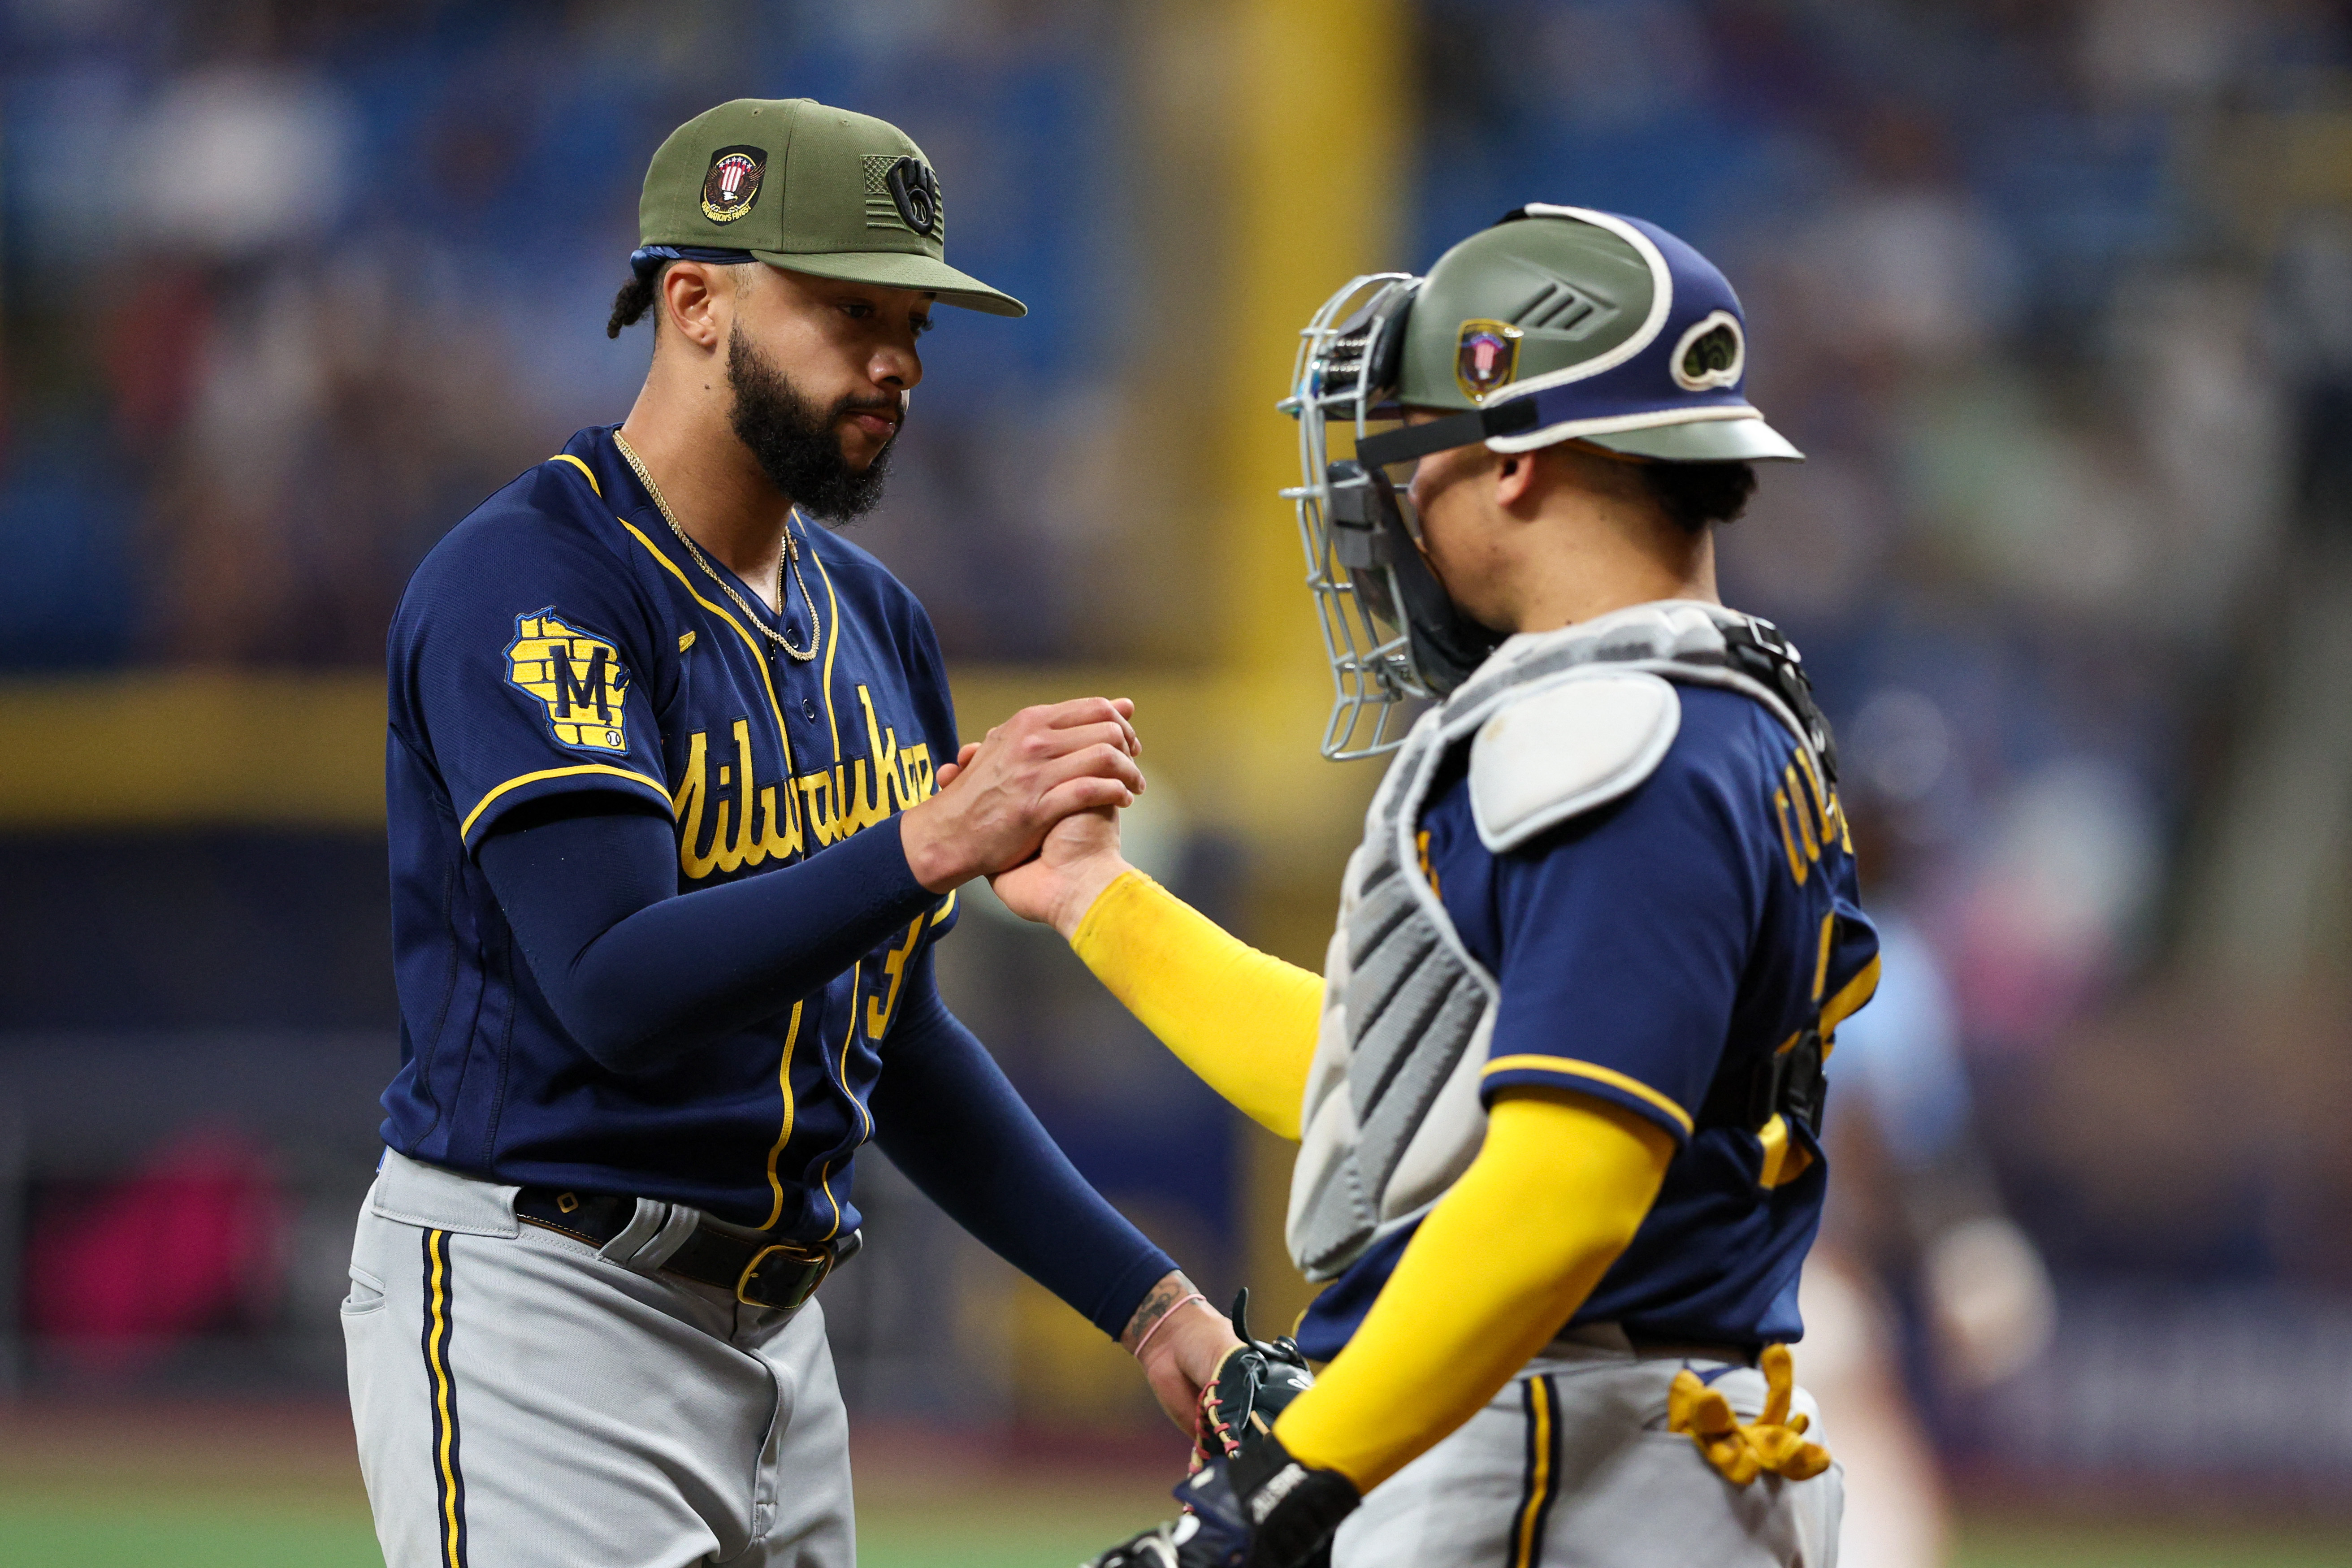 NLDS: Tellez's Homer Gives Brewers a Win Over Atlanta - The New York Times